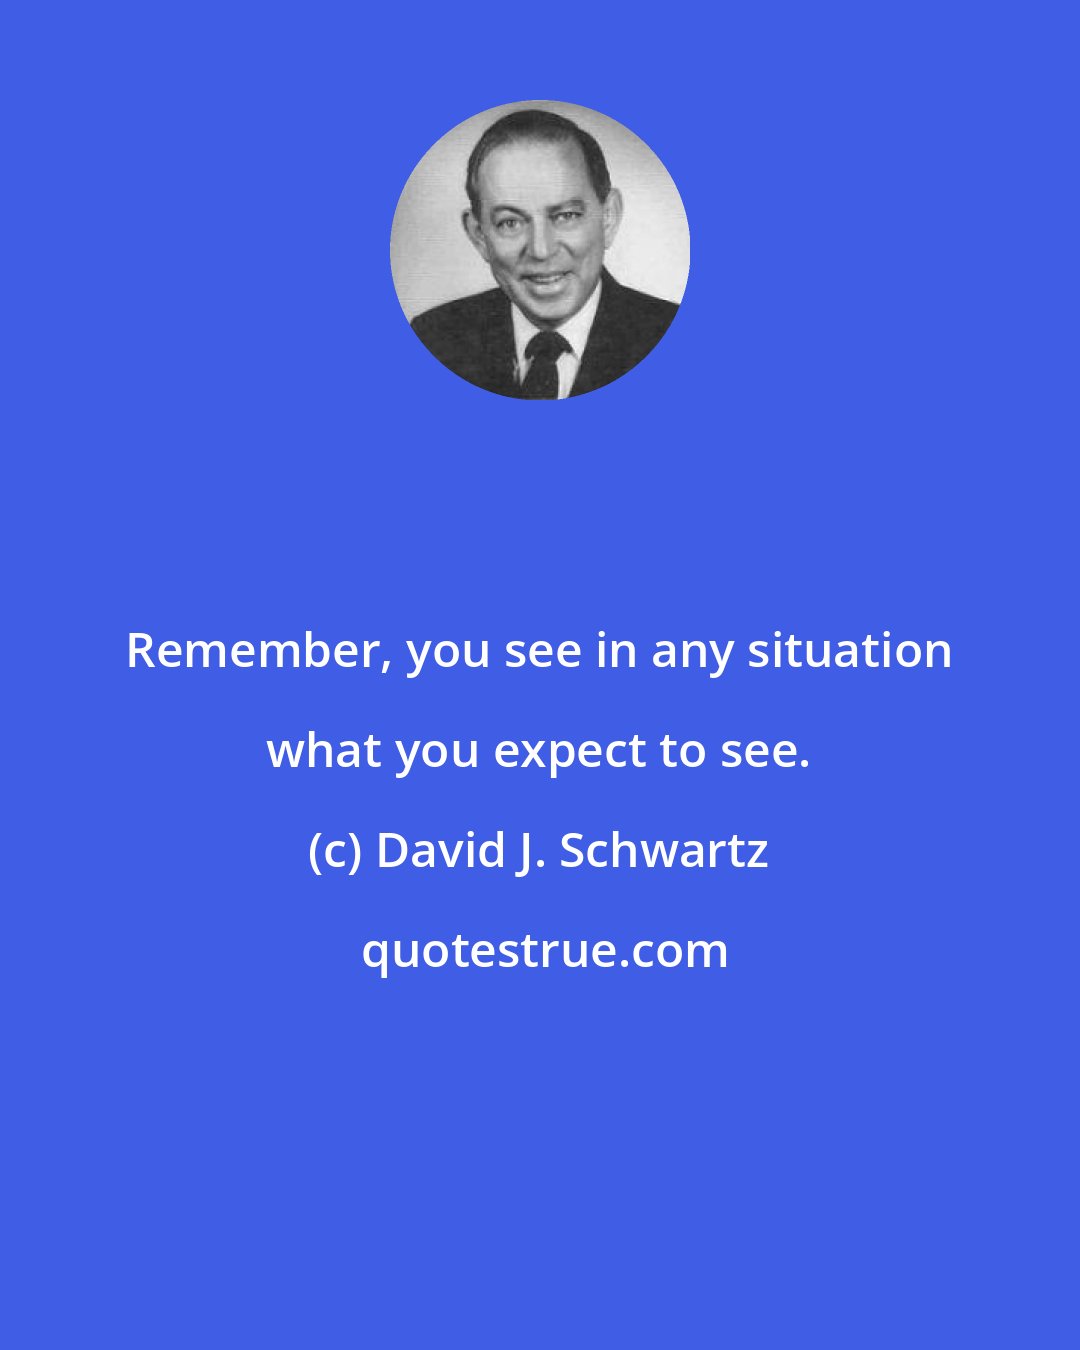 David J. Schwartz: Remember, you see in any situation what you expect to see.